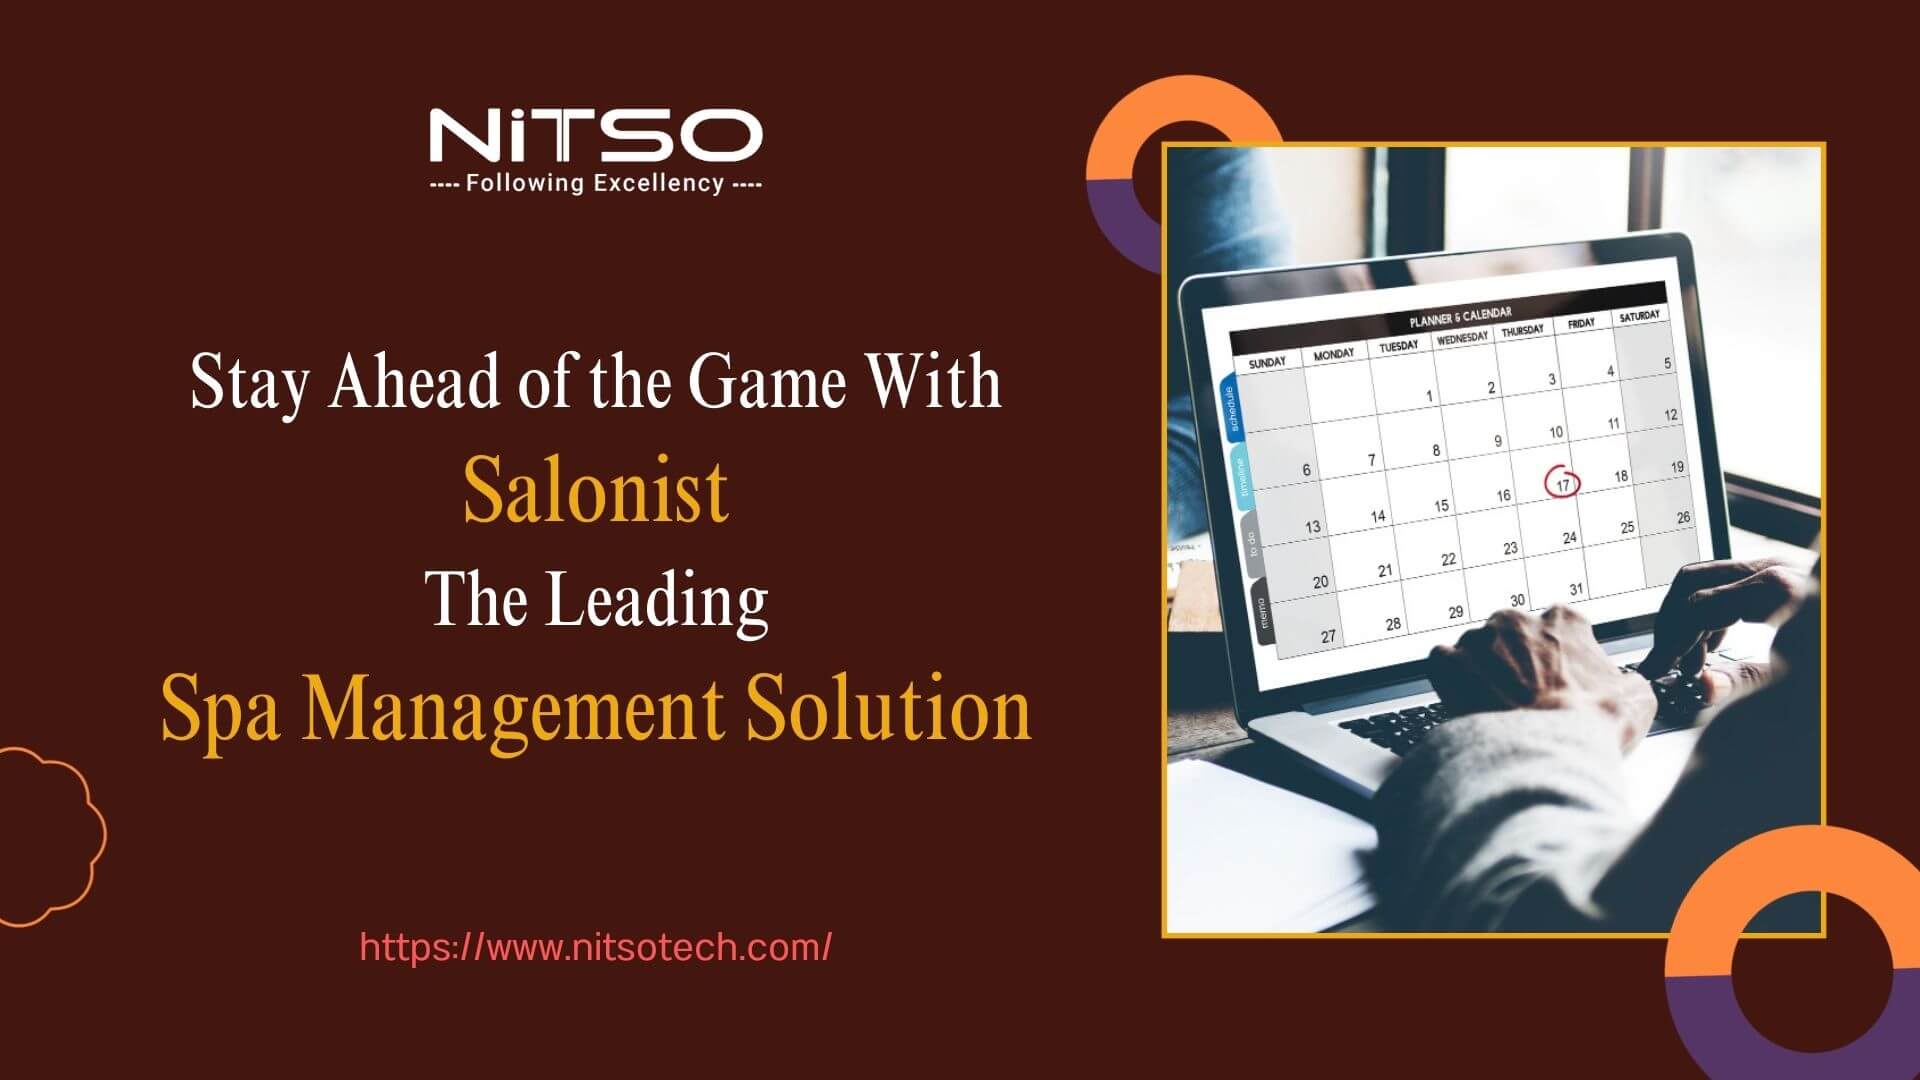 Stay Ahead With The Best Spa Management Solution - Salonist